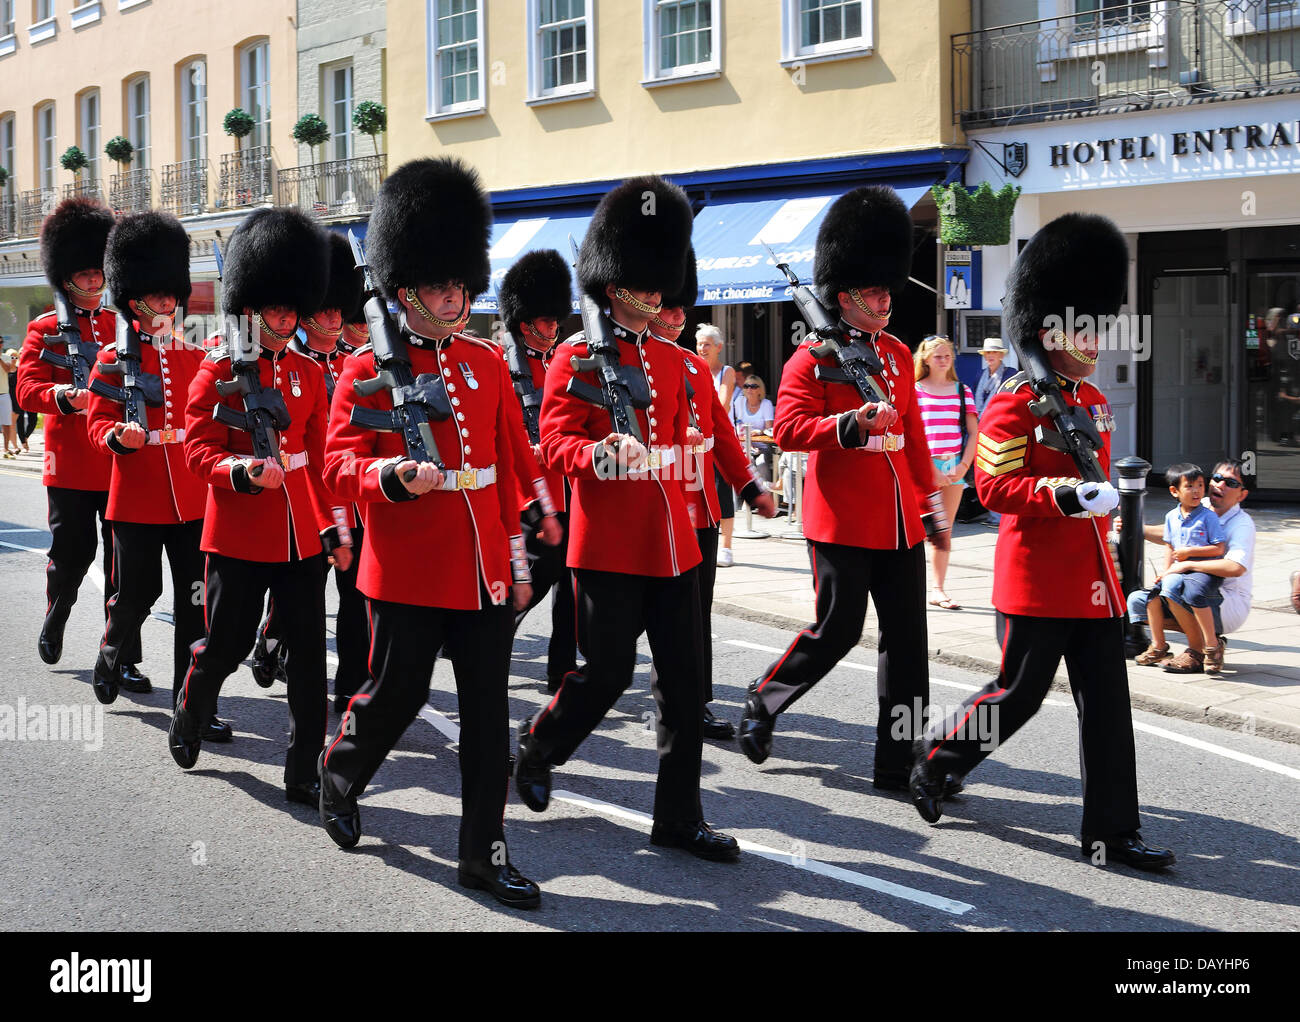 The Grenadier Guards marching through Royal Windsor for the Changing of the Guard Ceremony Stock Photo